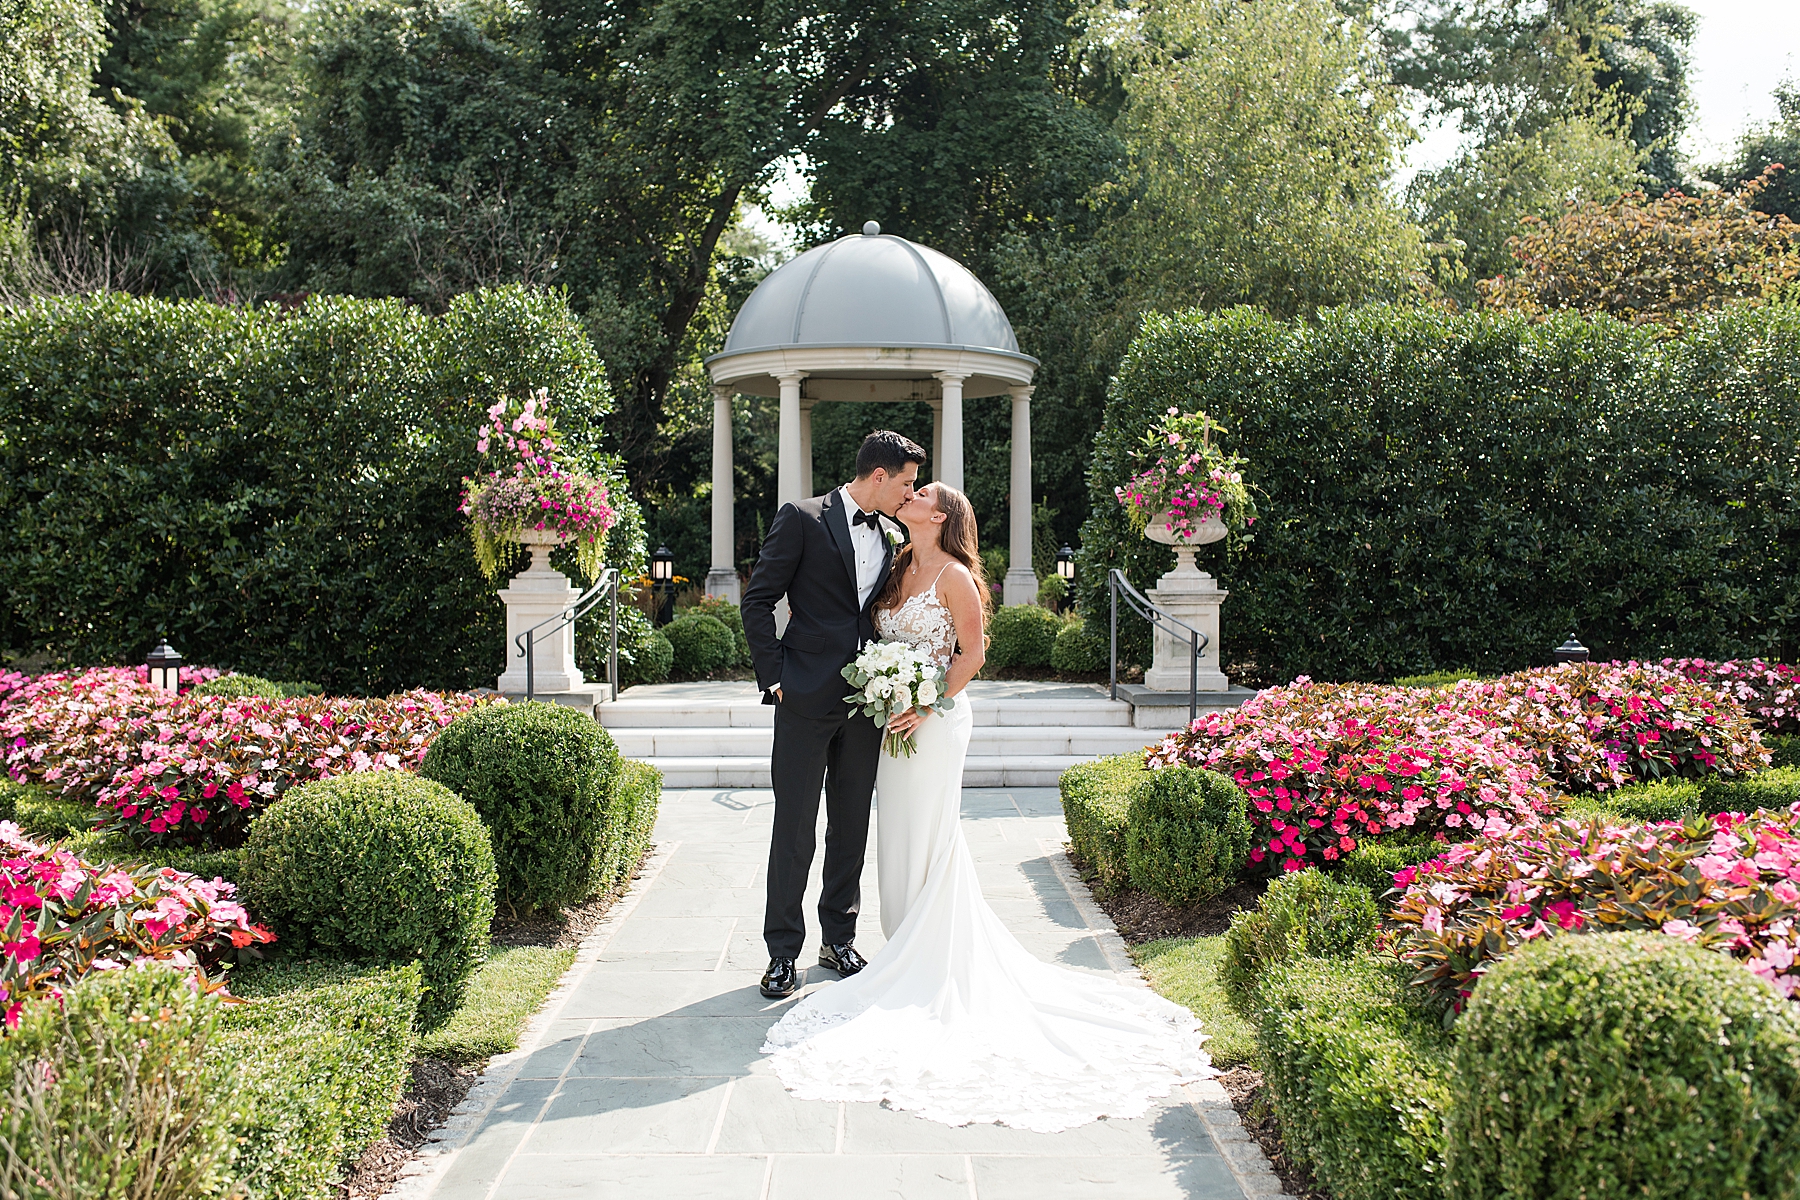 The Park Chateau Estate And Gardens Wedding Photo